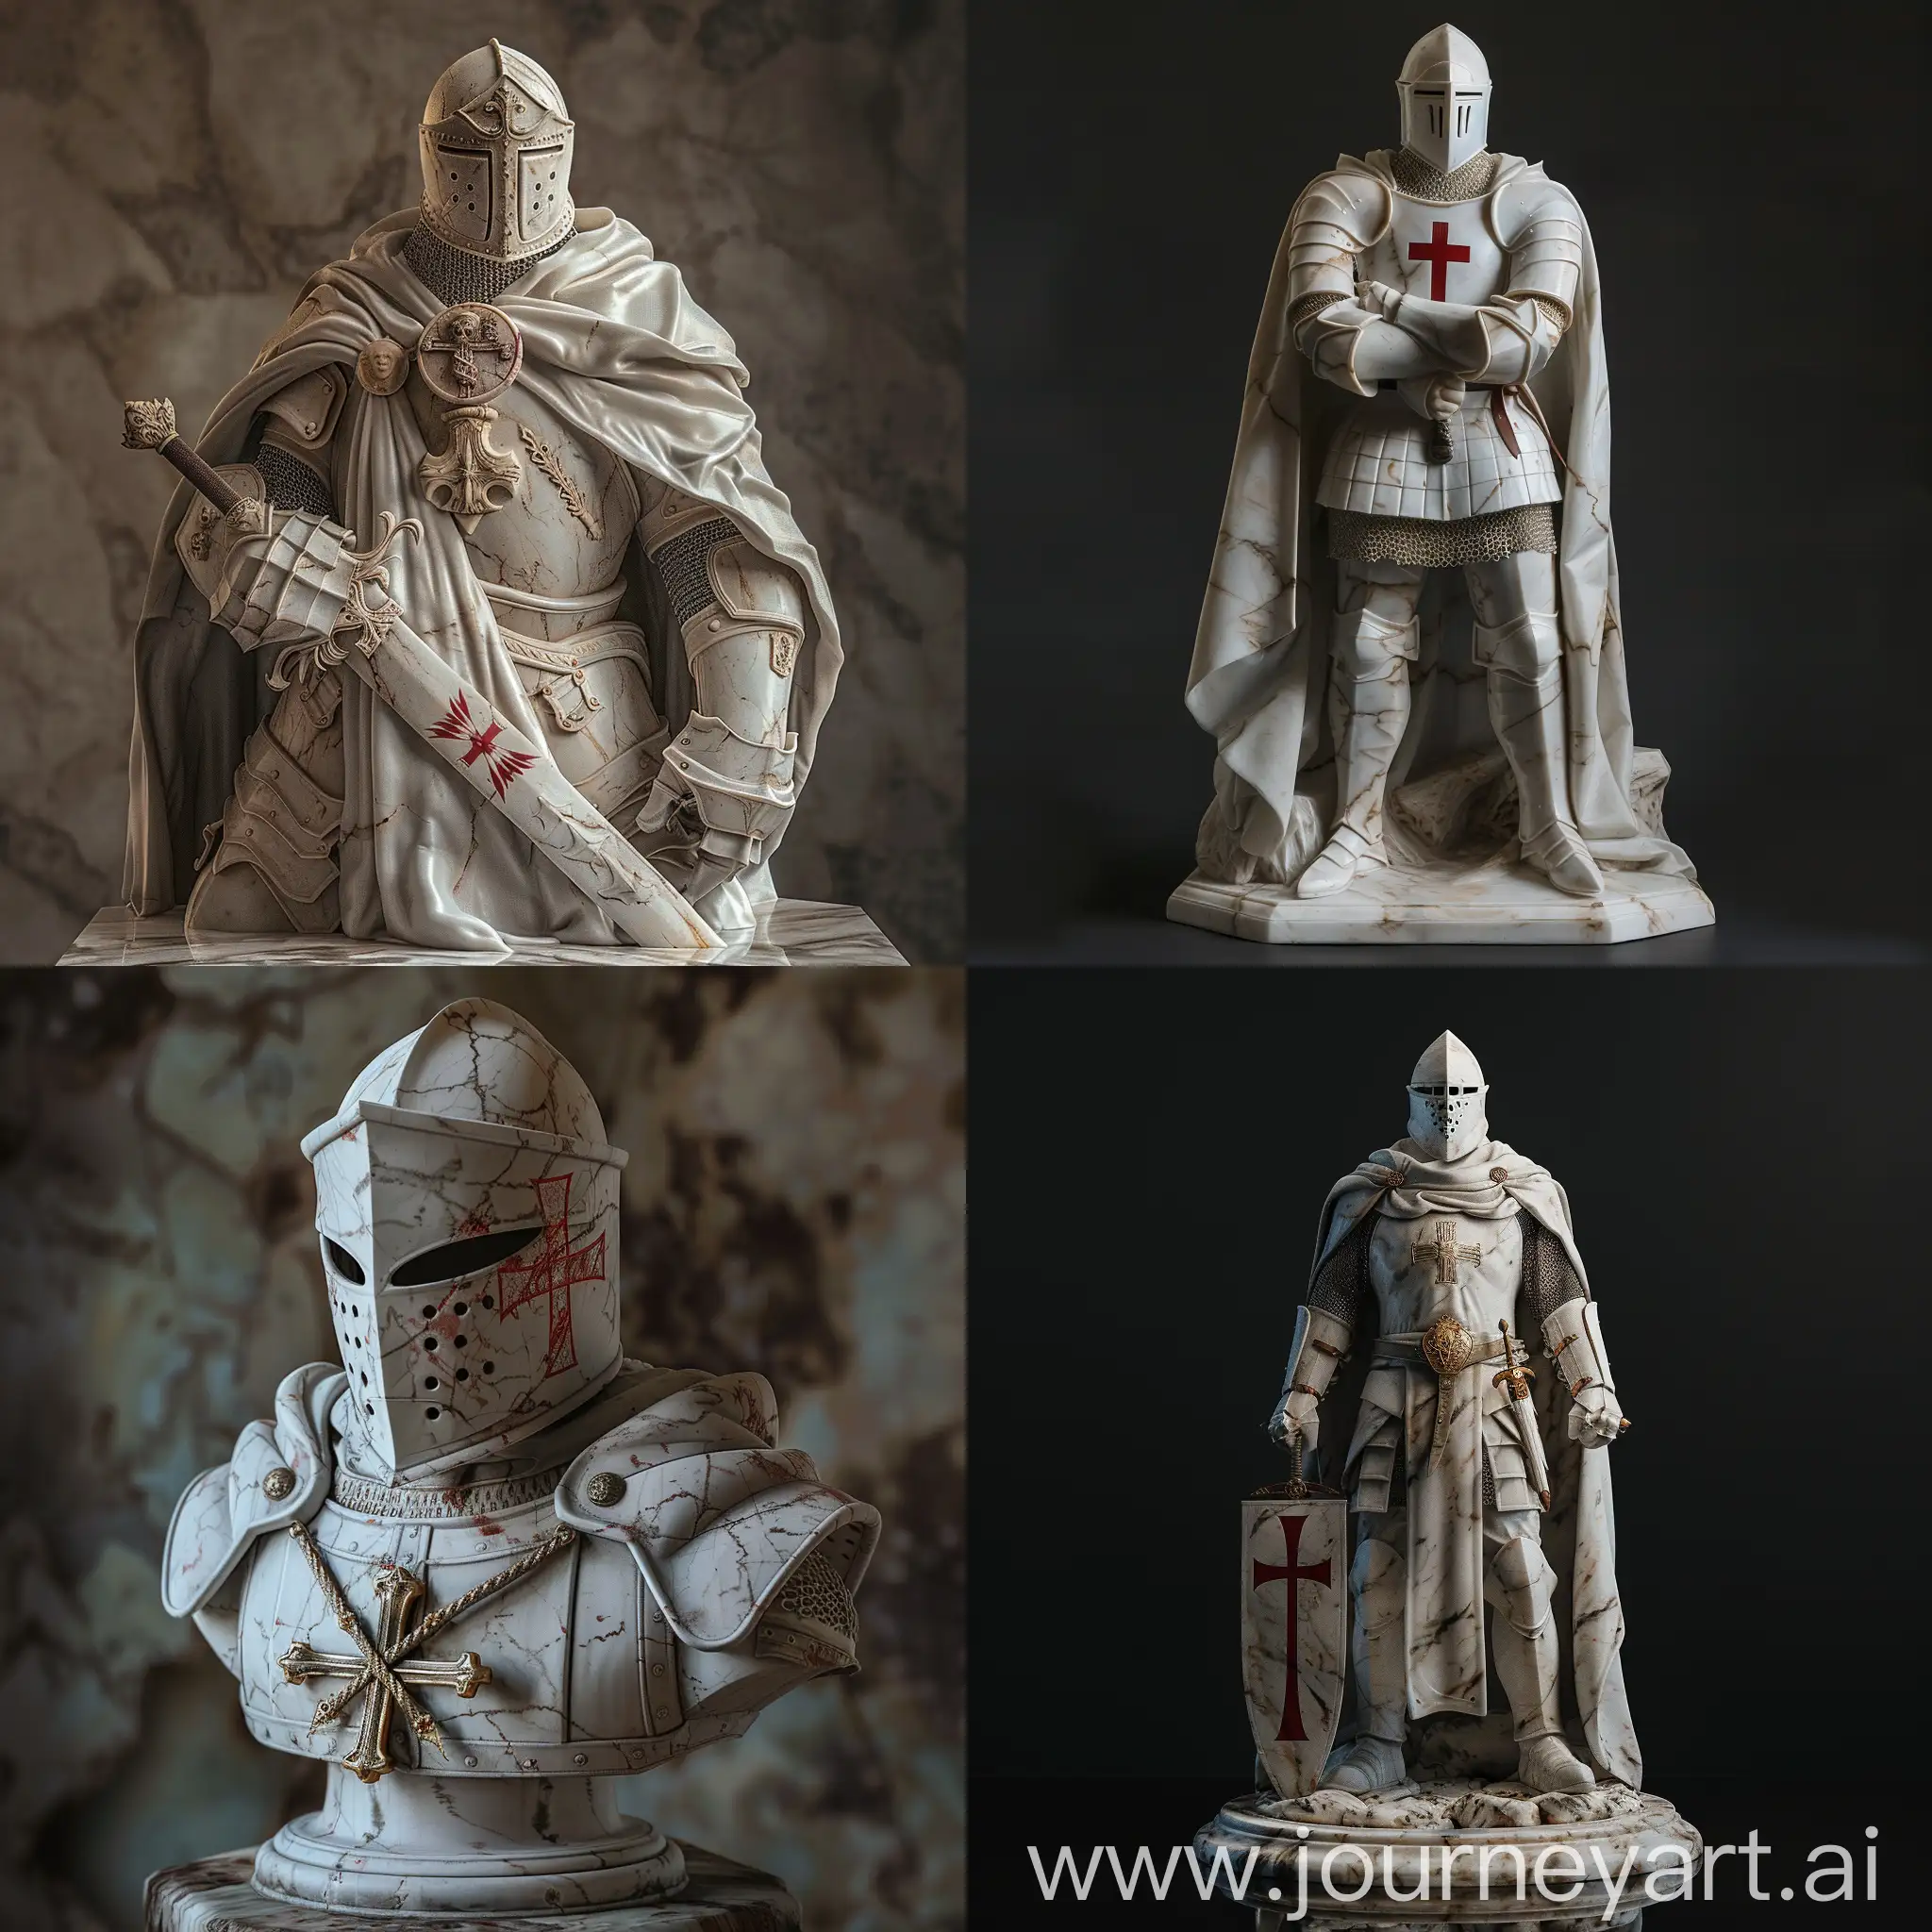 Templar-Knight-Marble-Sculpture-in-Hyperealistic-Style